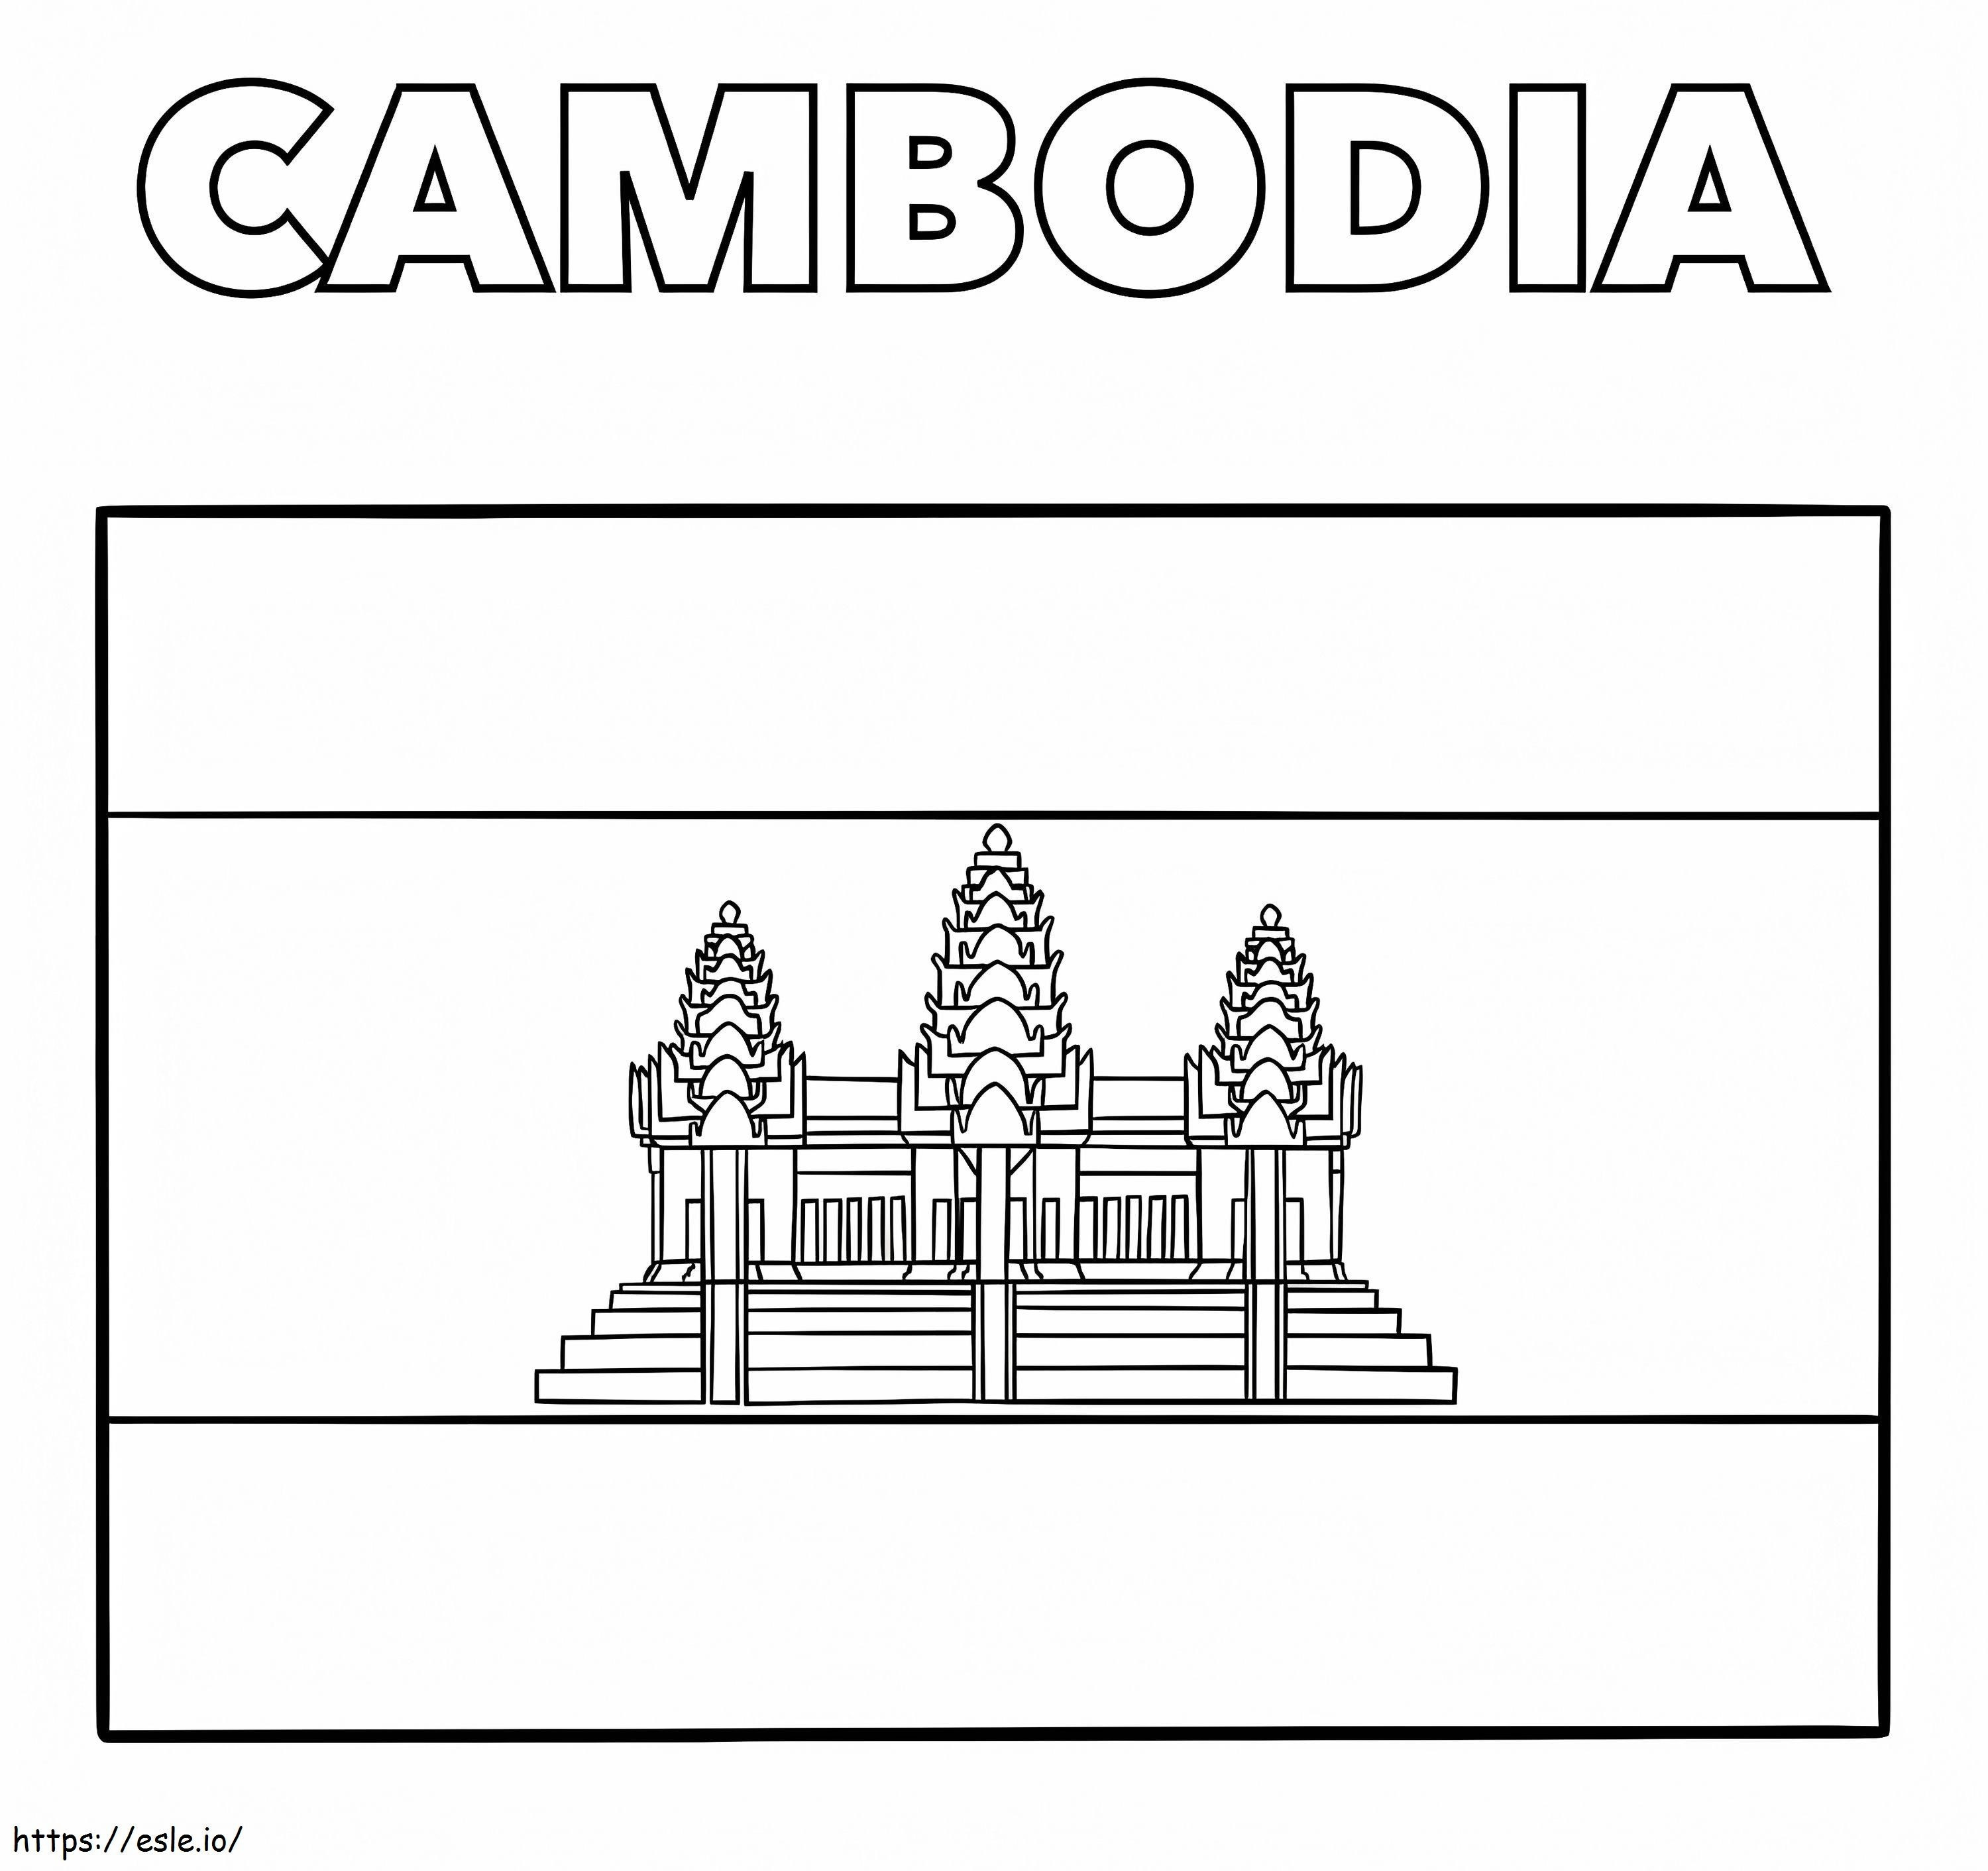 Printable Cambodia coloring page